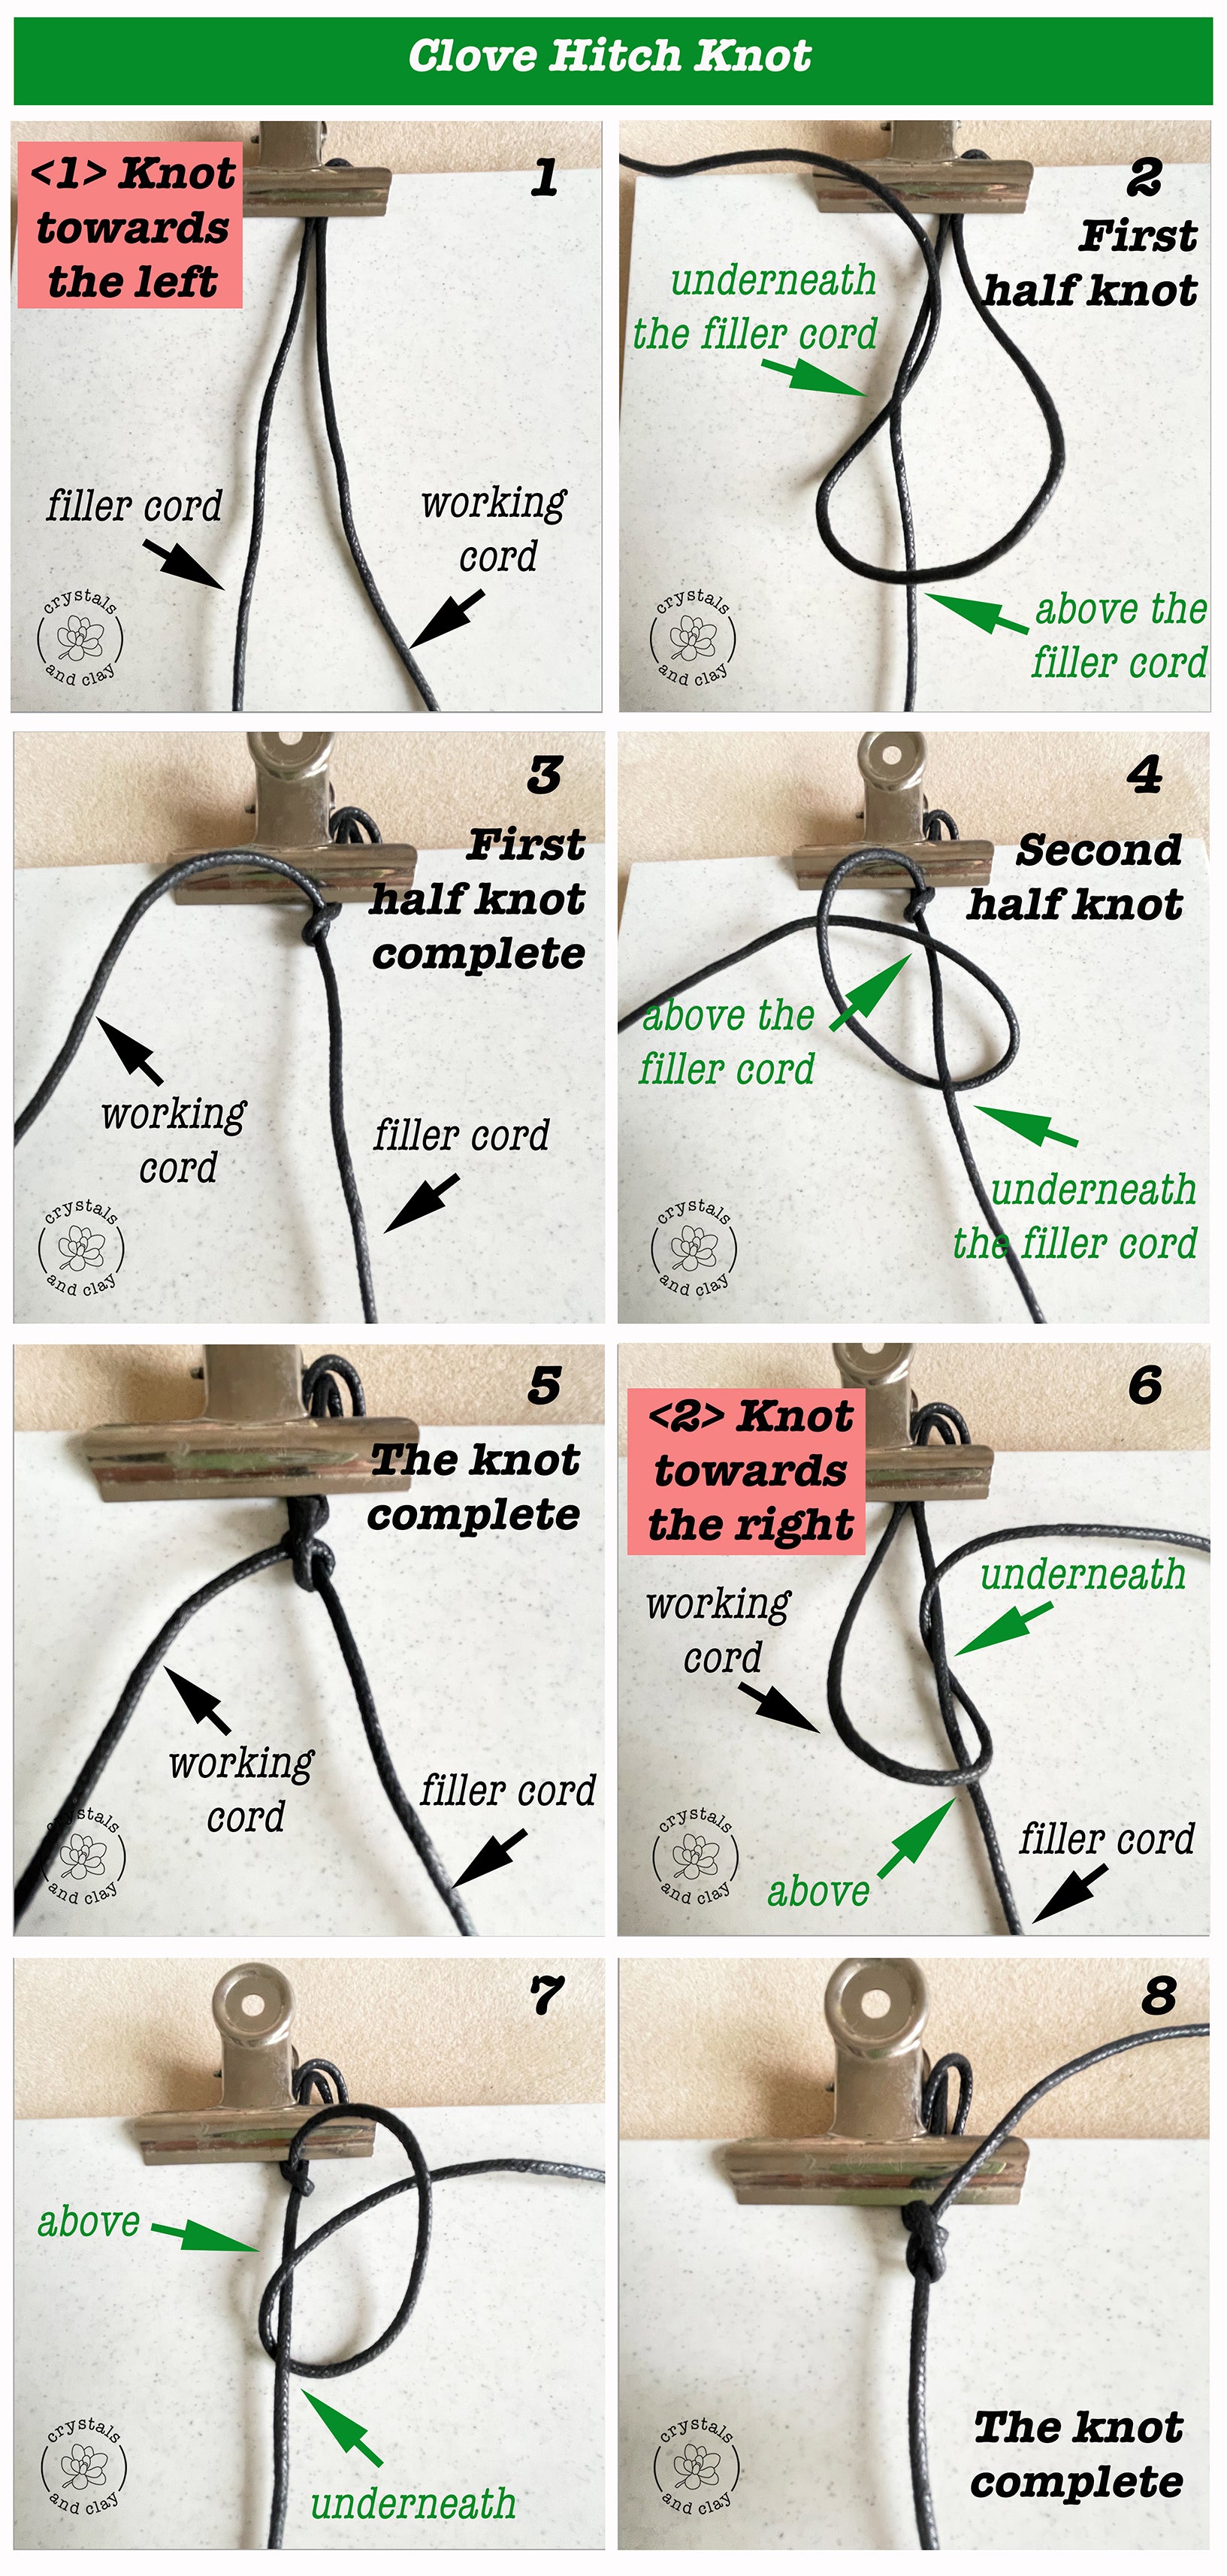 how to make clove hitch knot